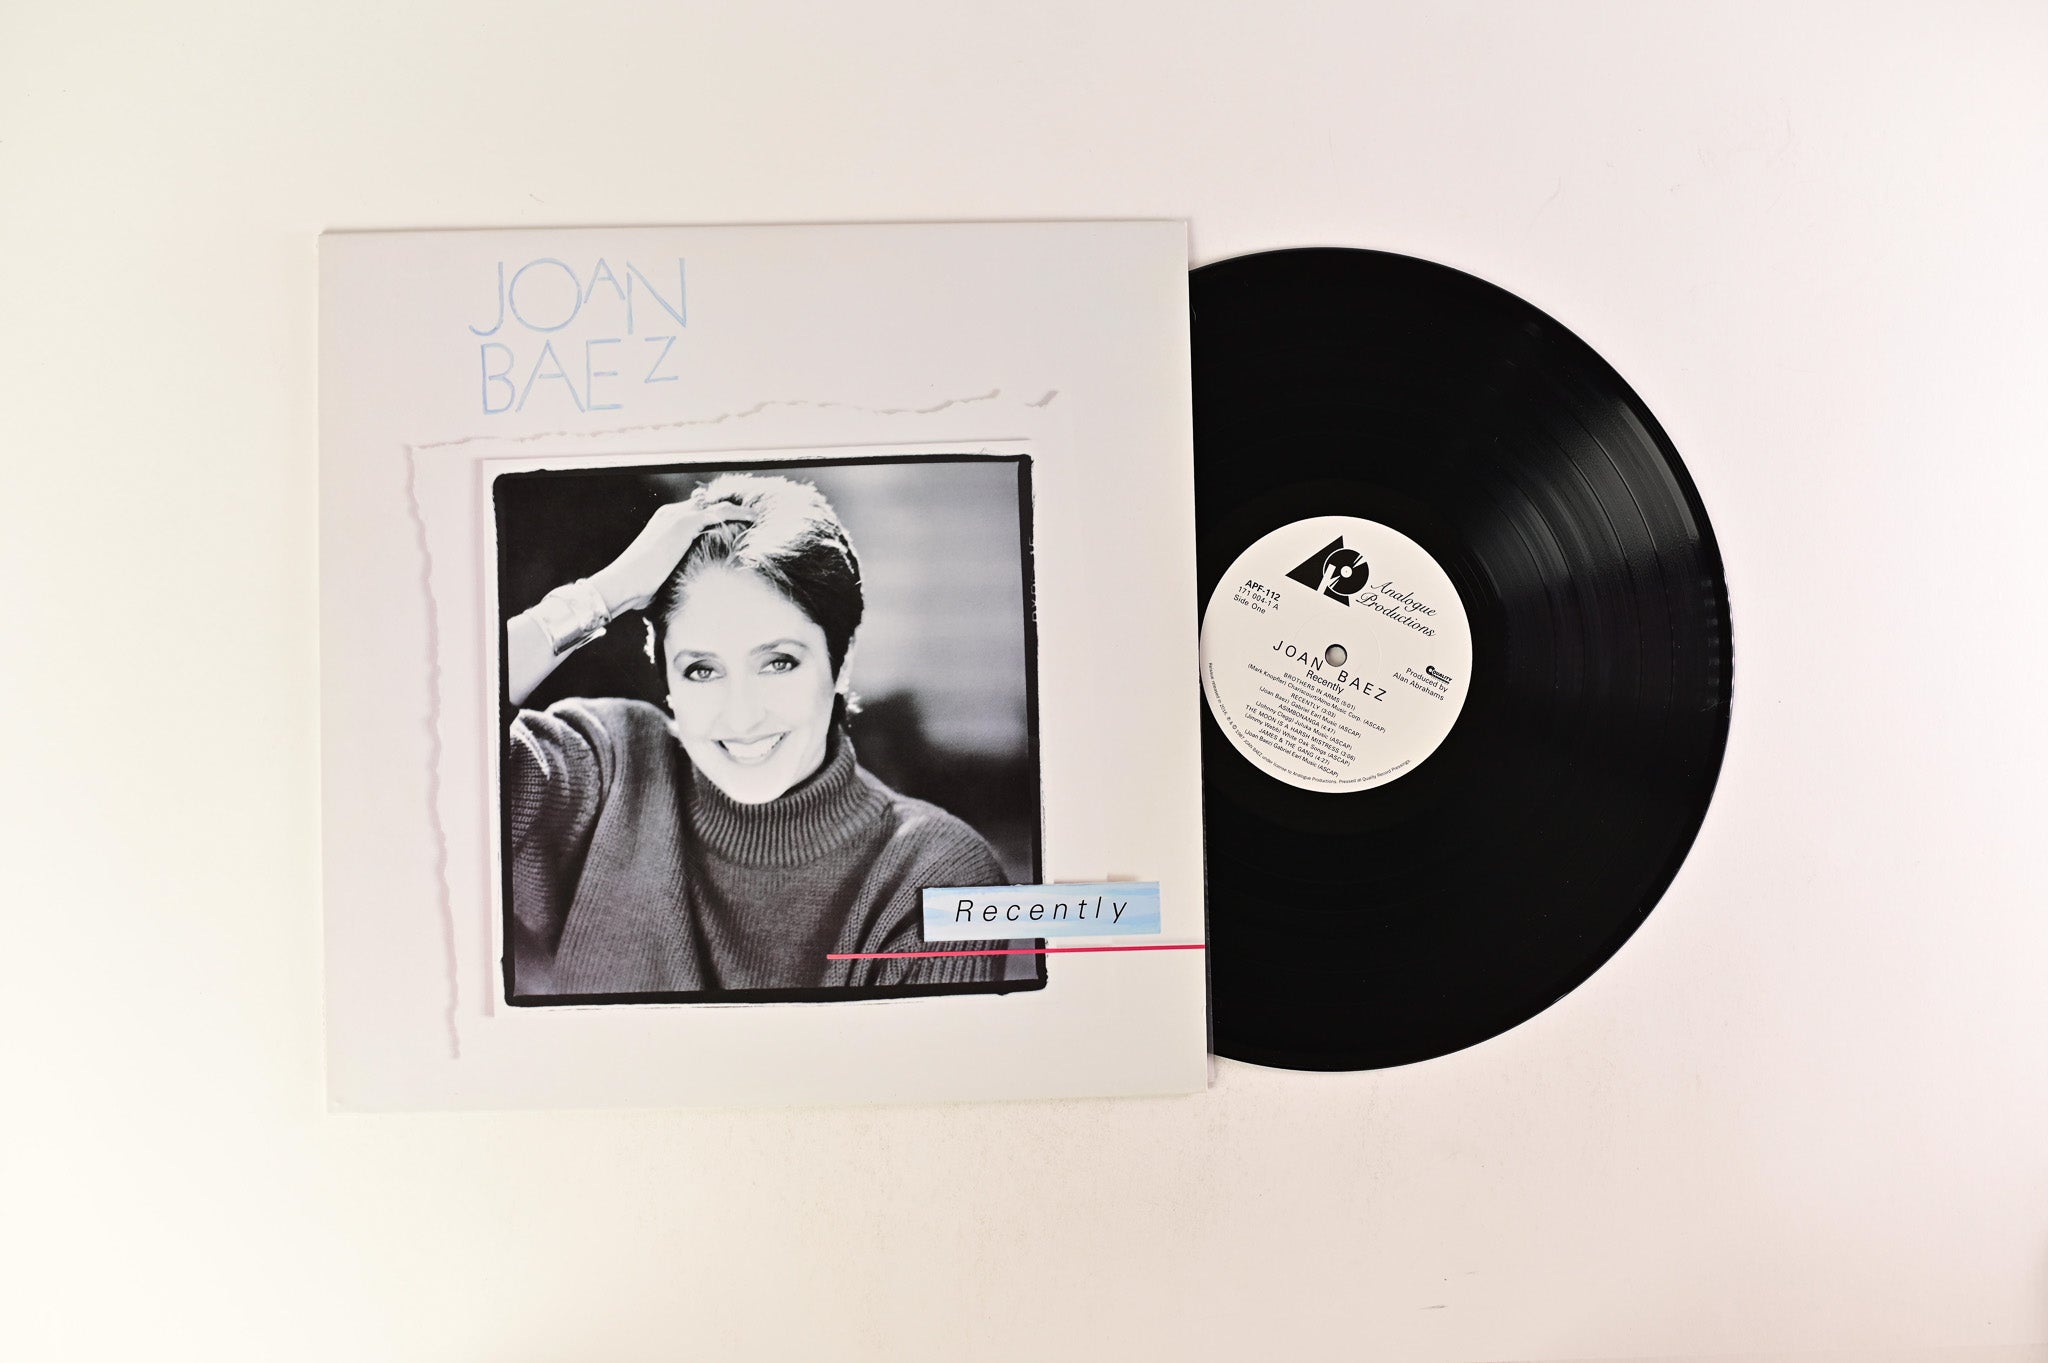 Joan Baez - Recently Reissue on Analogue Productions